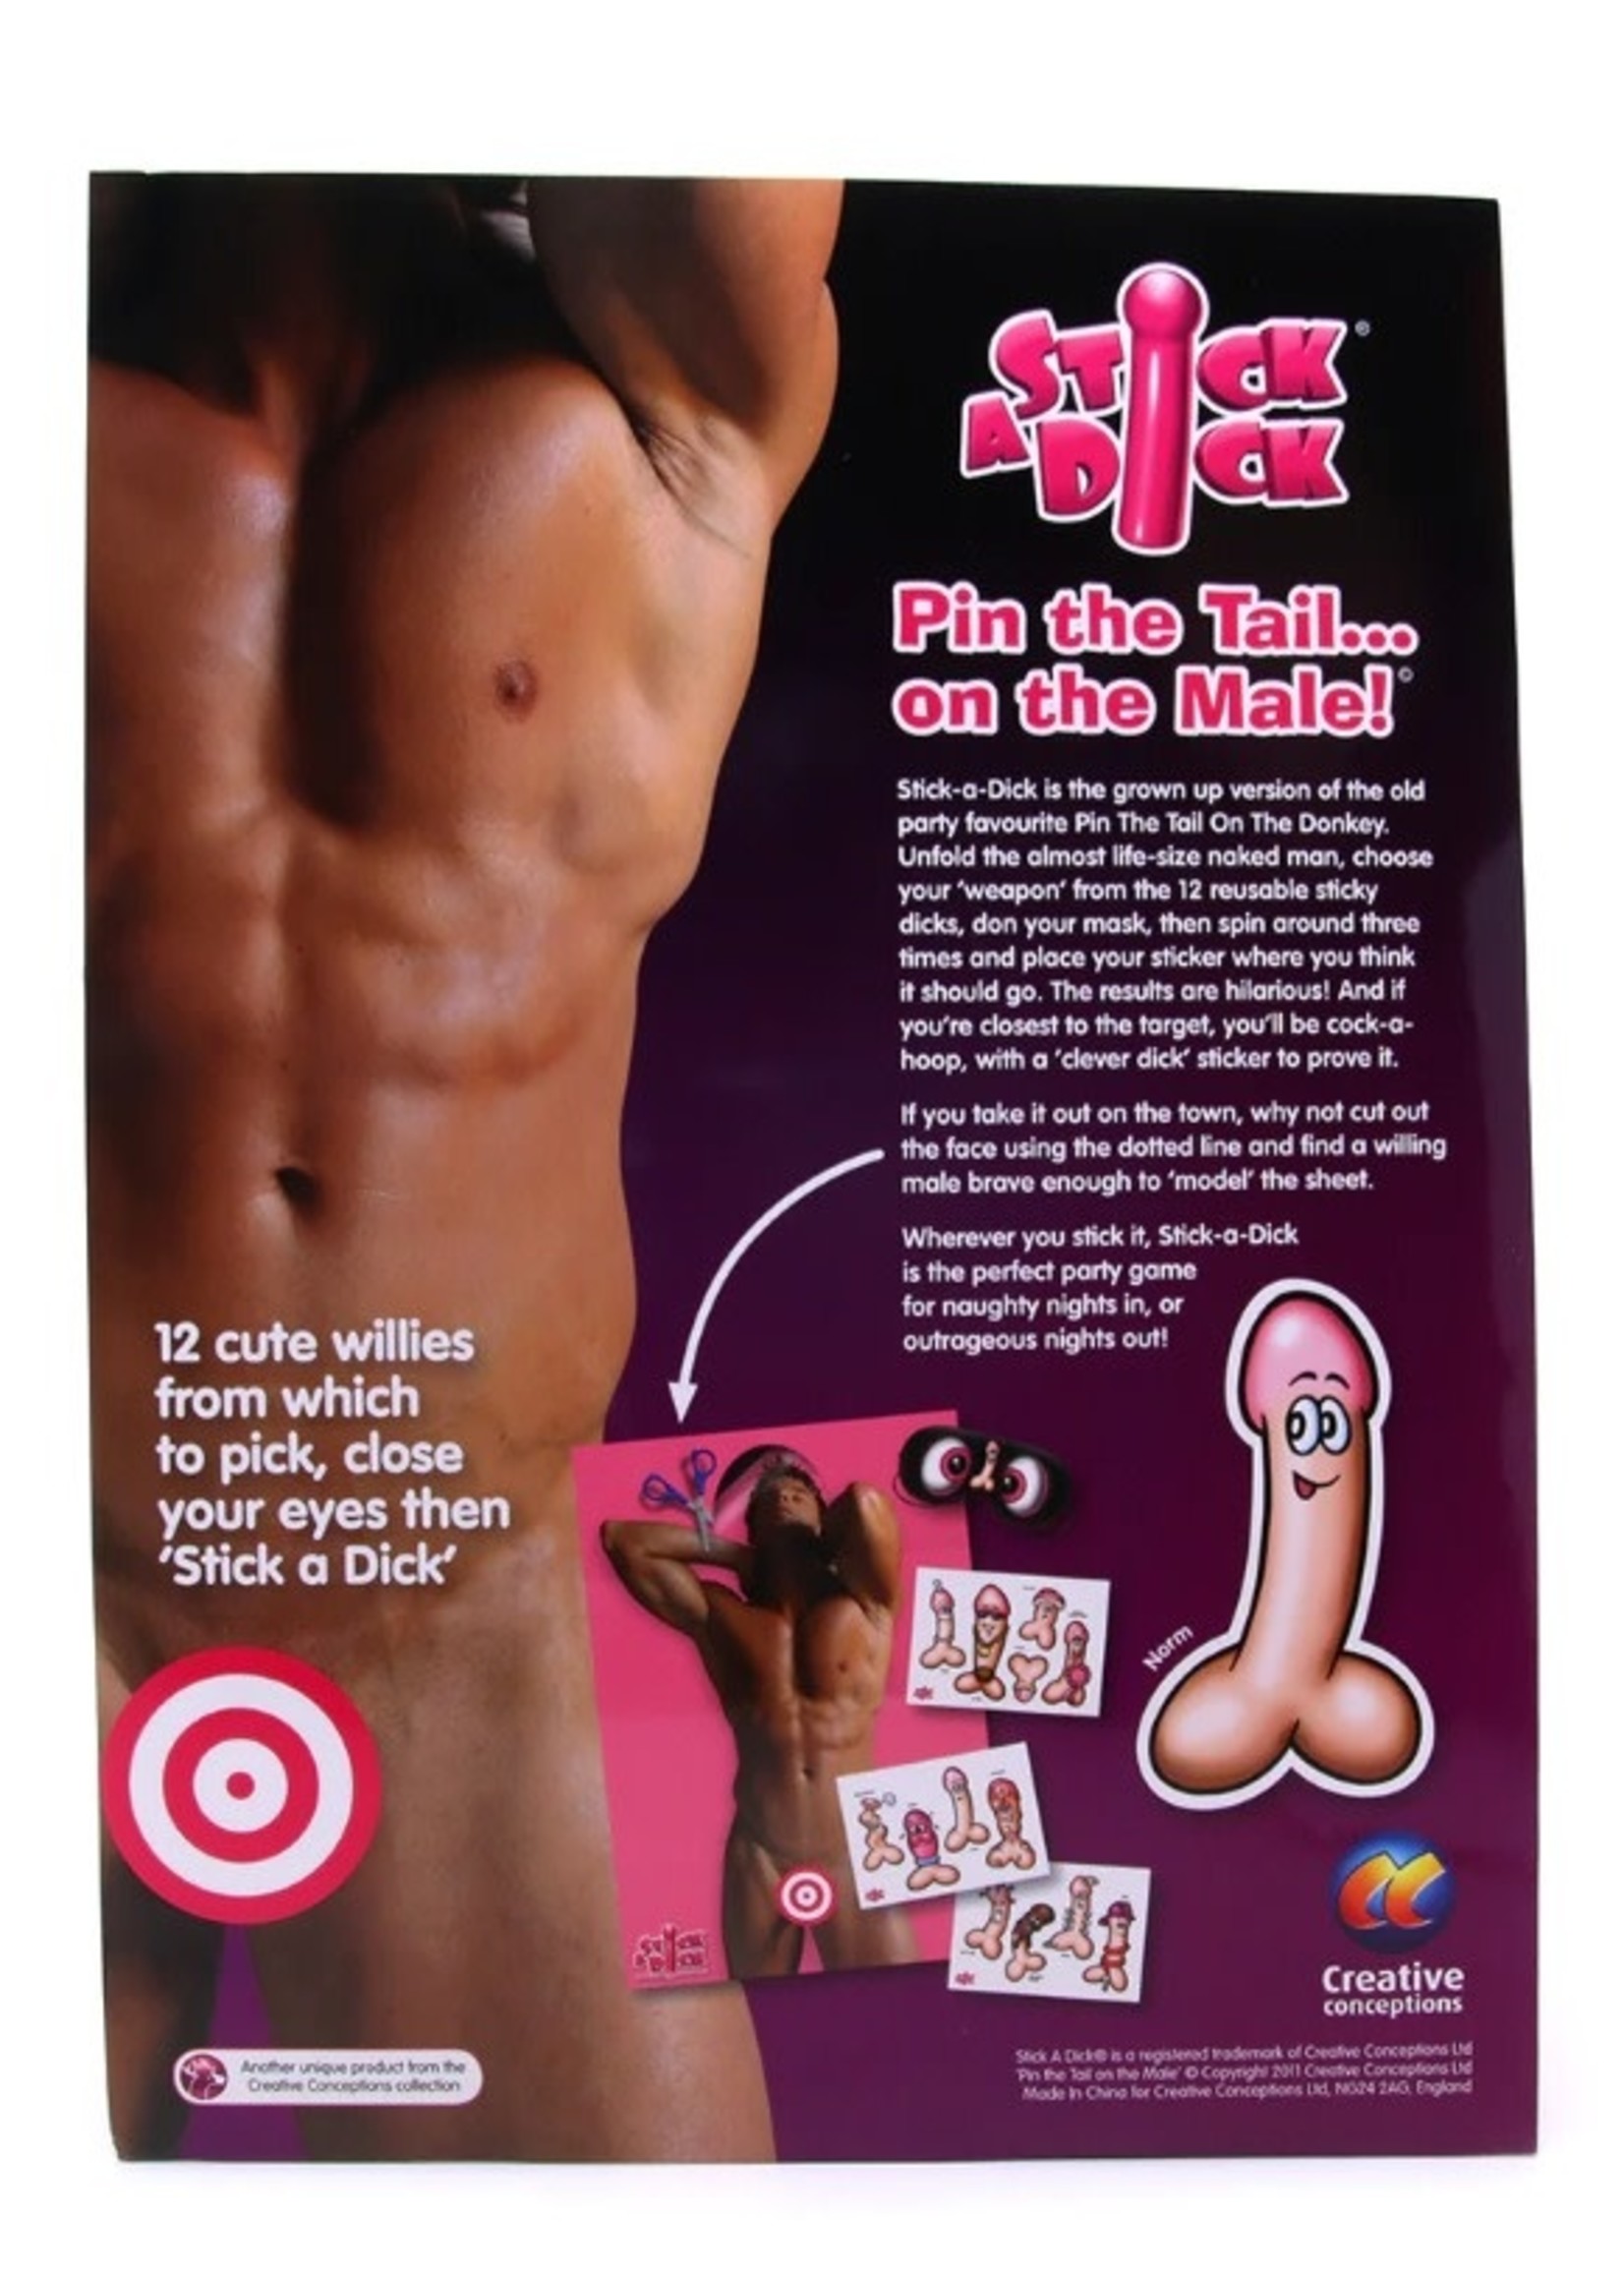 Stick a Dick 'Pin the Tail on the Male' Hunk Edition